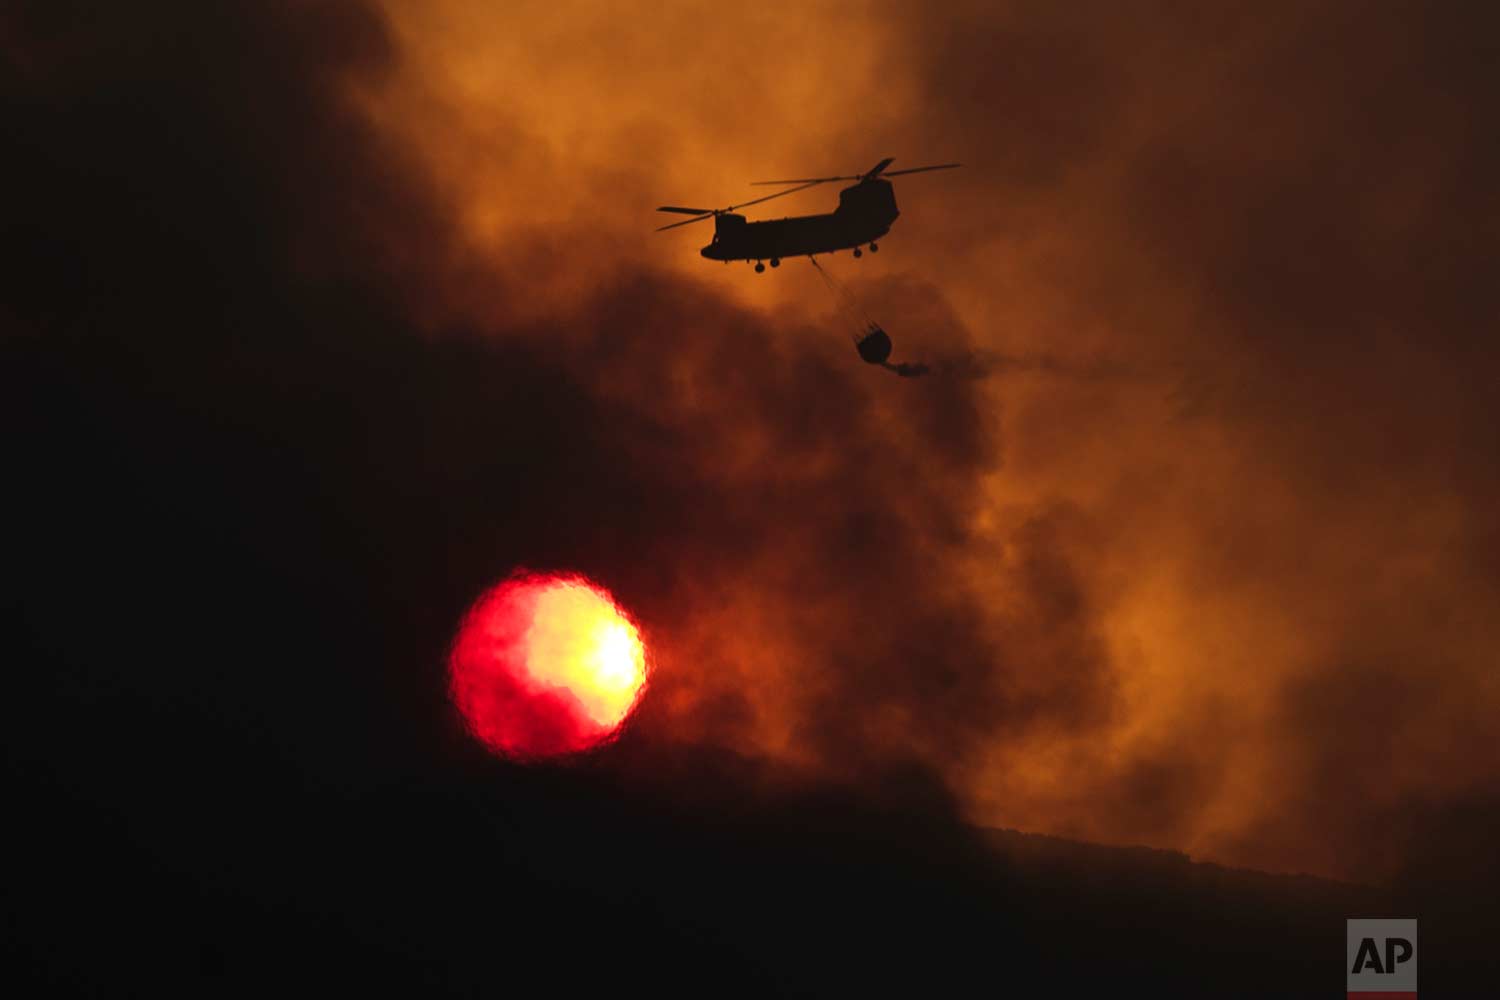  In this Tuesday Aug. 15, 2017 photo, a fire fighting helicopter flies amid smoke as the sun sets during a forest fire near Kapandriti  north of Athens. A large wildfire north of Athens is threatening homes as it sweeps through pine forest for a thir